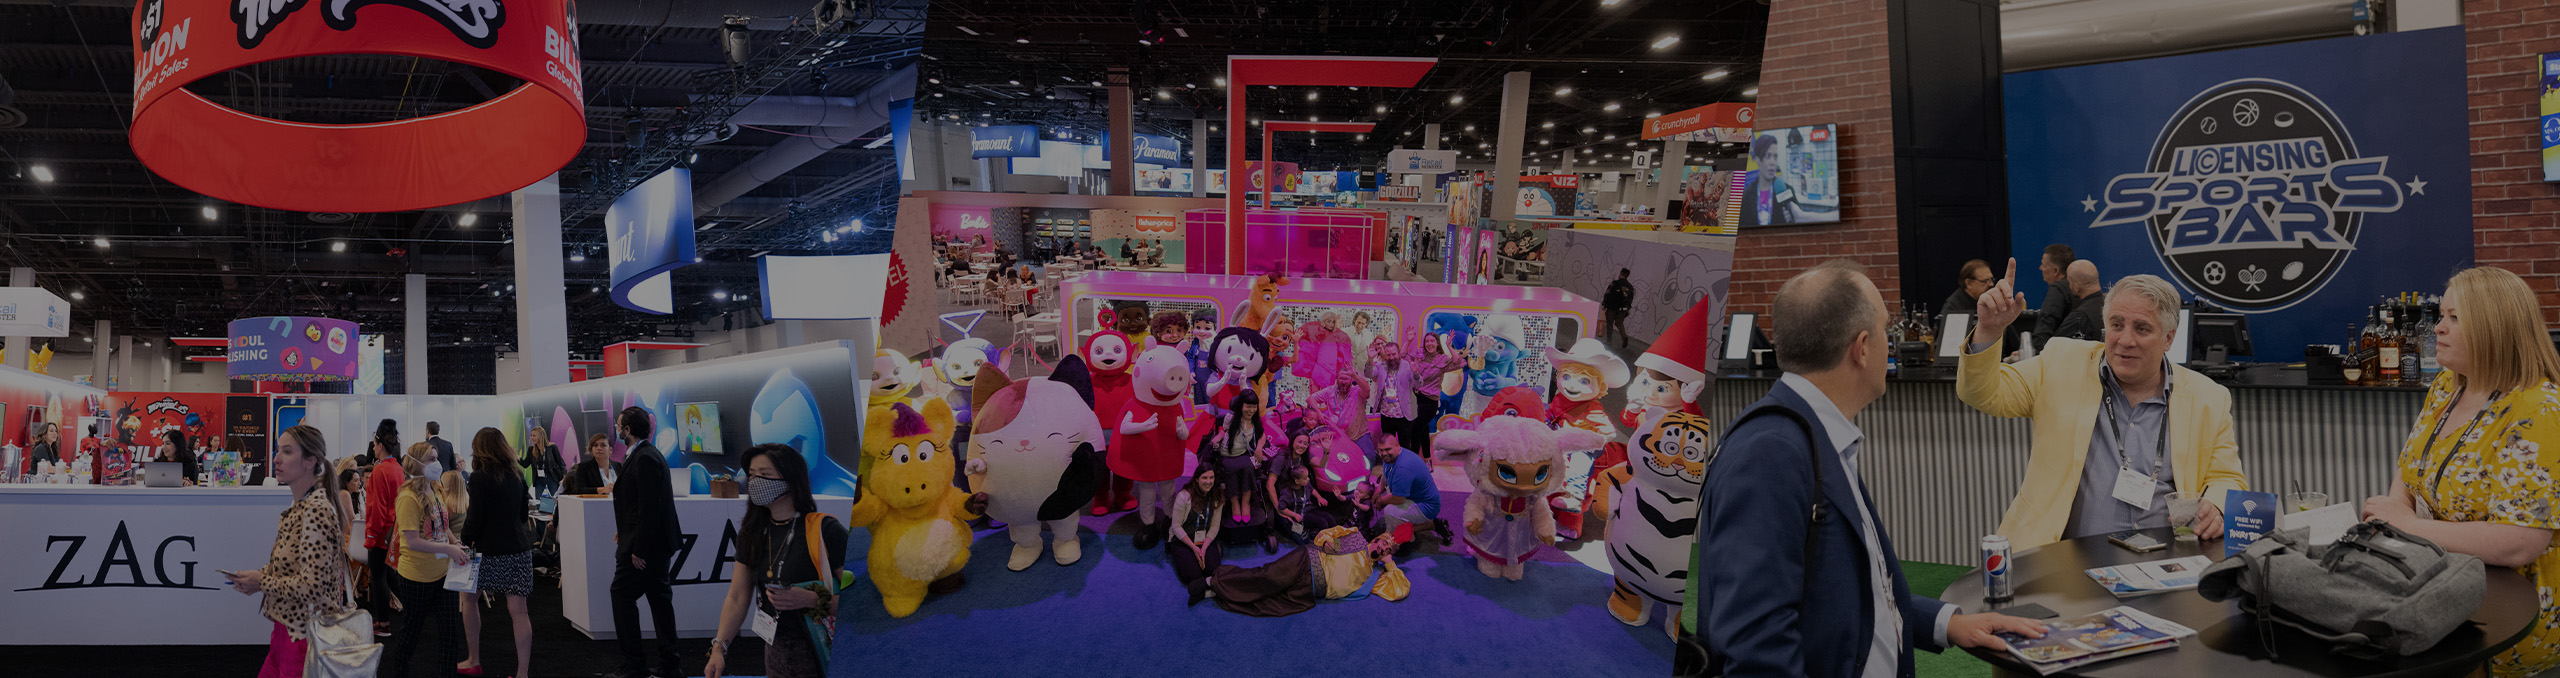 Licensing Expo | The meeting place for the global licensing industry